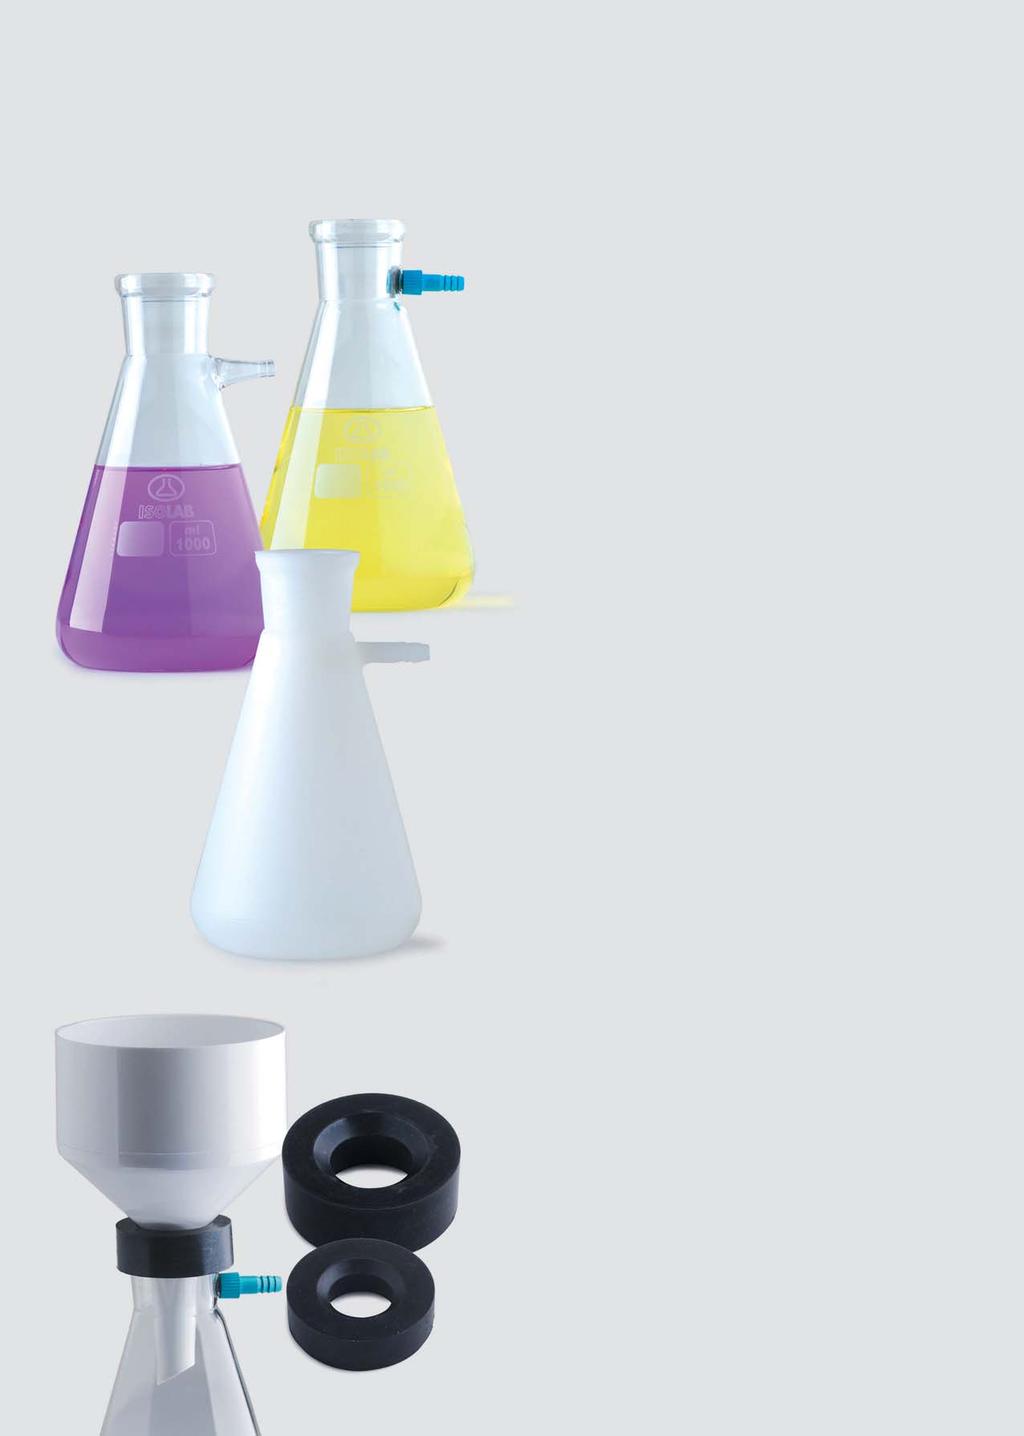 analytical laboratory filter flasks glass Manufactured from borosilicate glass 3.3 with thick walls according to ISO 6556 and DIN 12476 standards.